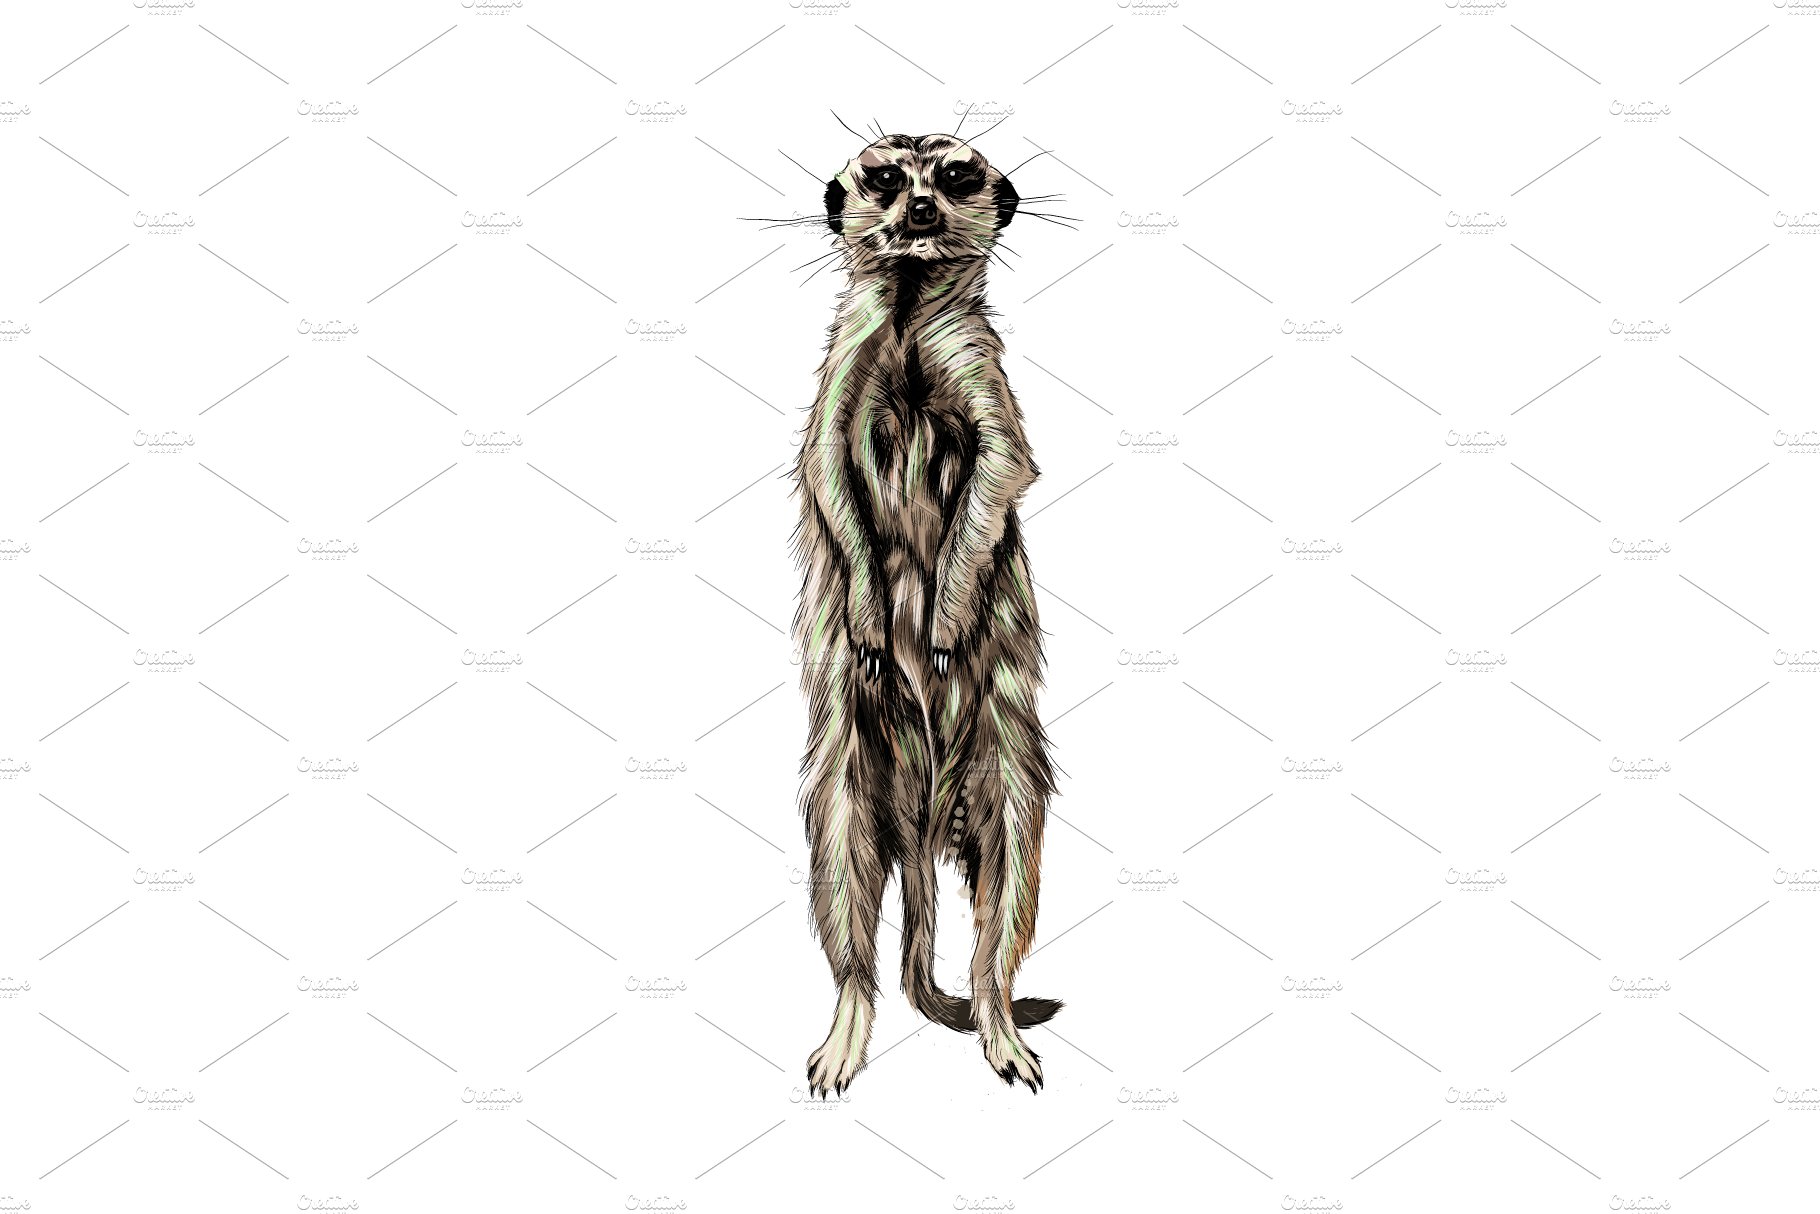 Meerkat from a splash of watercolor cover image.